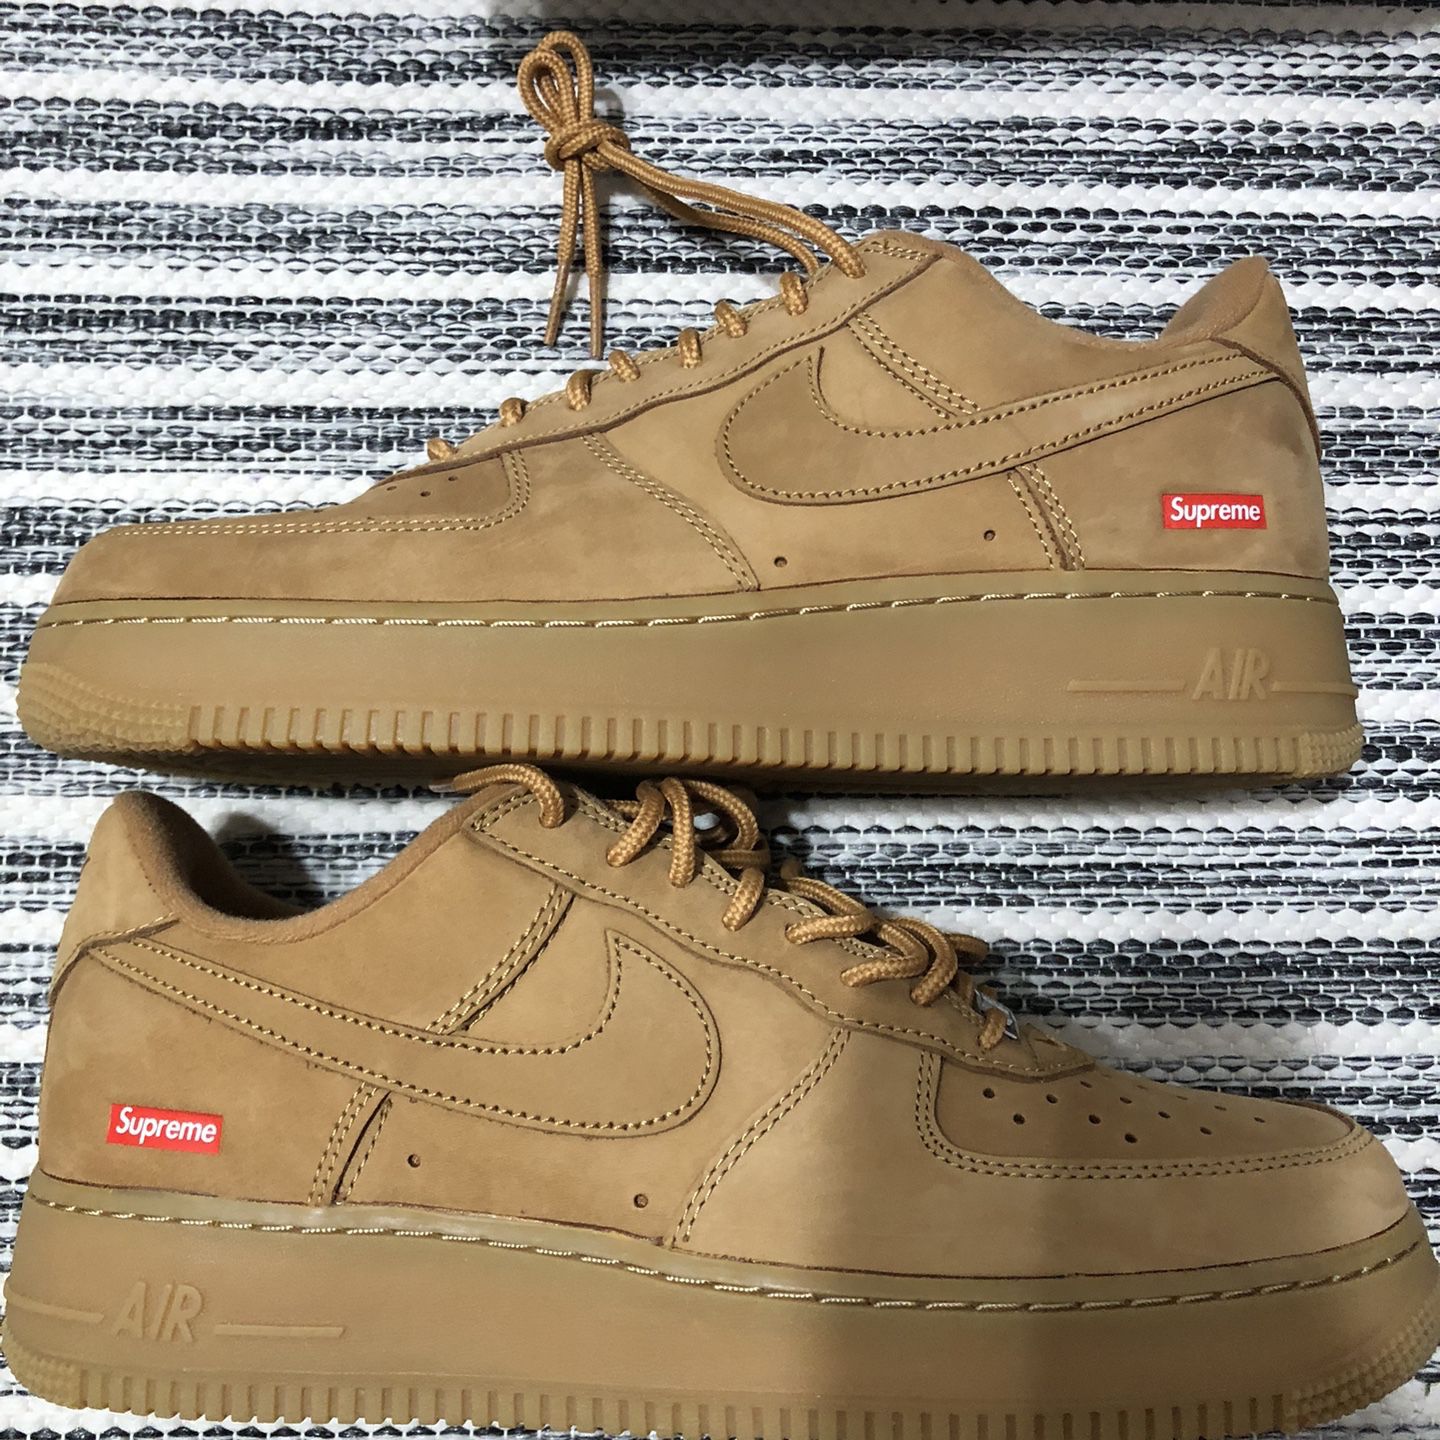 Supreme x Nike Air Force 1 Low SP Wheat / Flax: Review & On-Feet